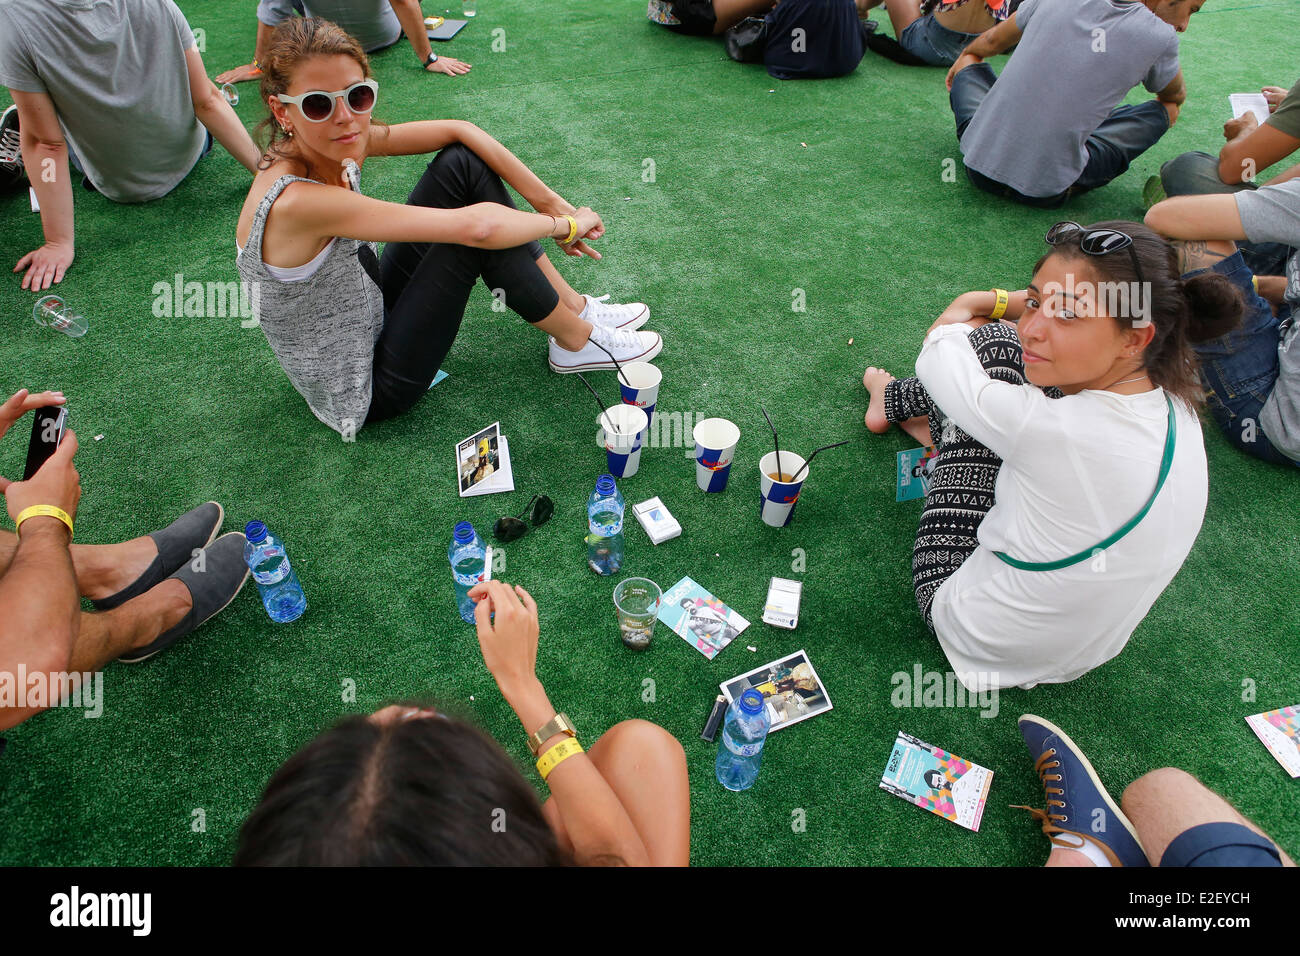 Festival goers seen relaxing or chilling during Sonar advanced music and media festival in Barcelona, spain Stock Photo